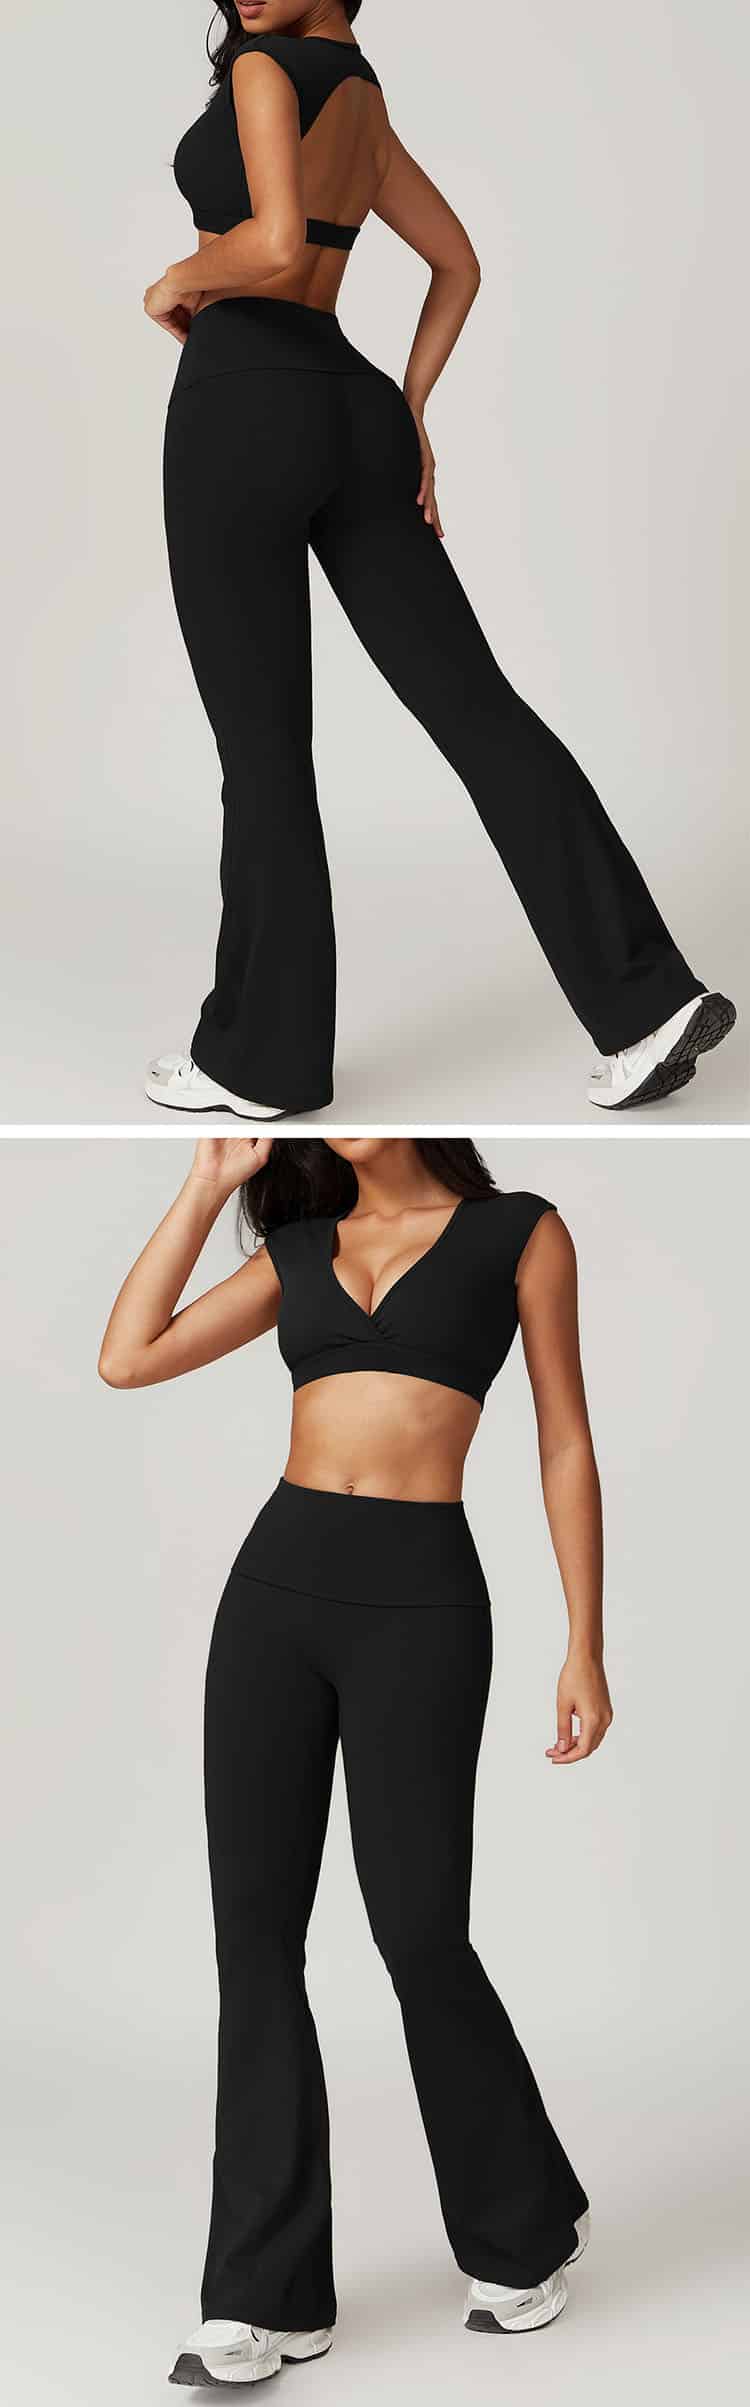 High waist design is adopted to cover the abdominal fat and make it slim